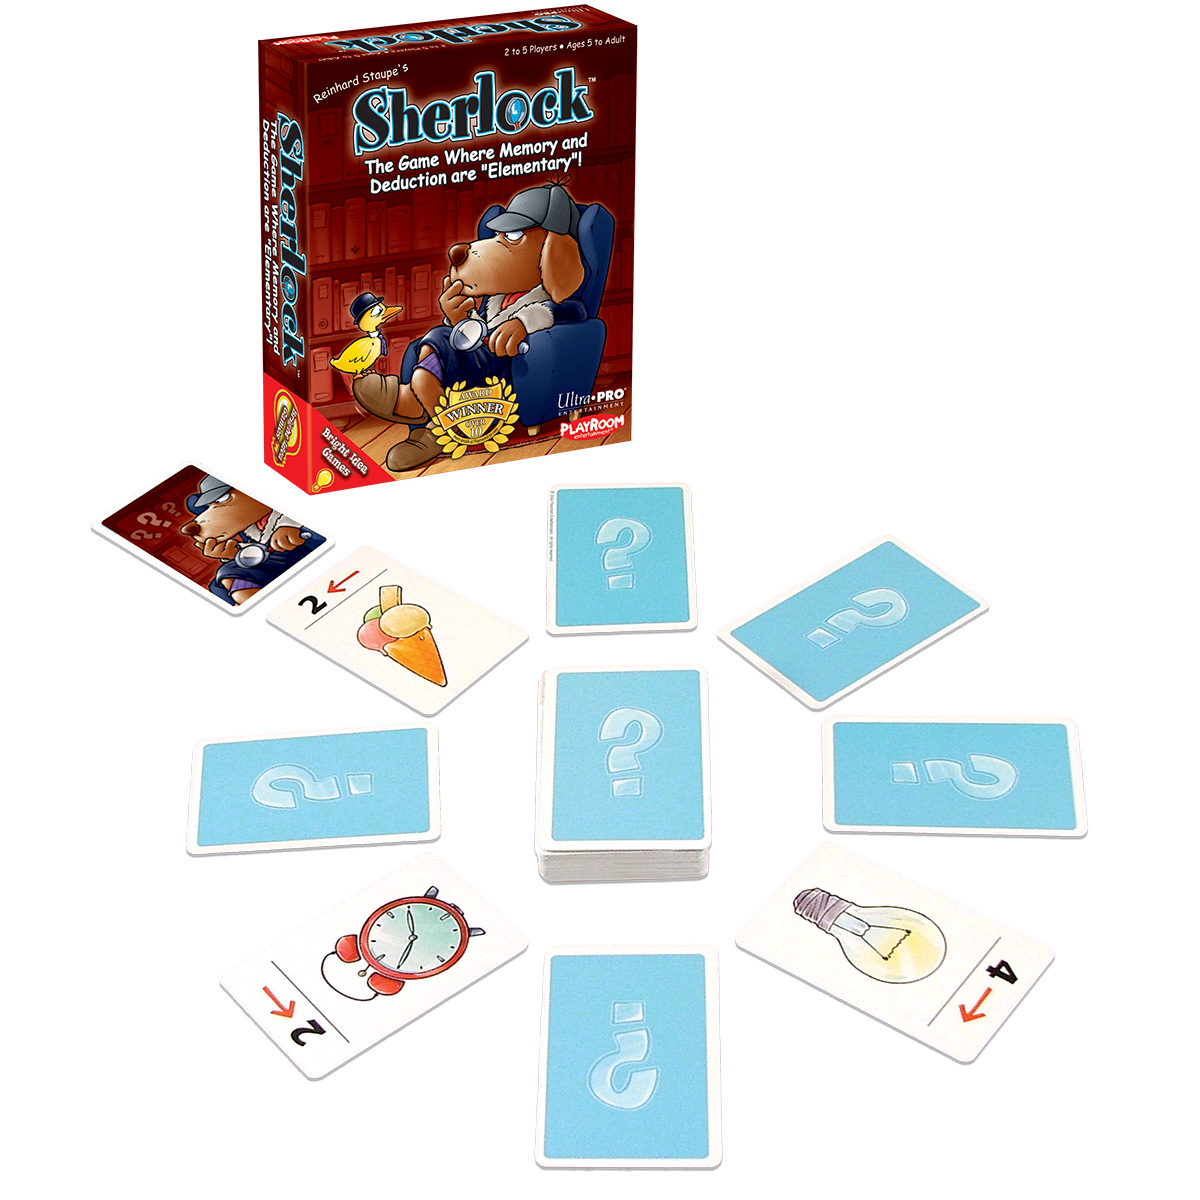 Sherlock | Kids Memory Game for Ages 5 and Up | Ultra PRO Entertainment